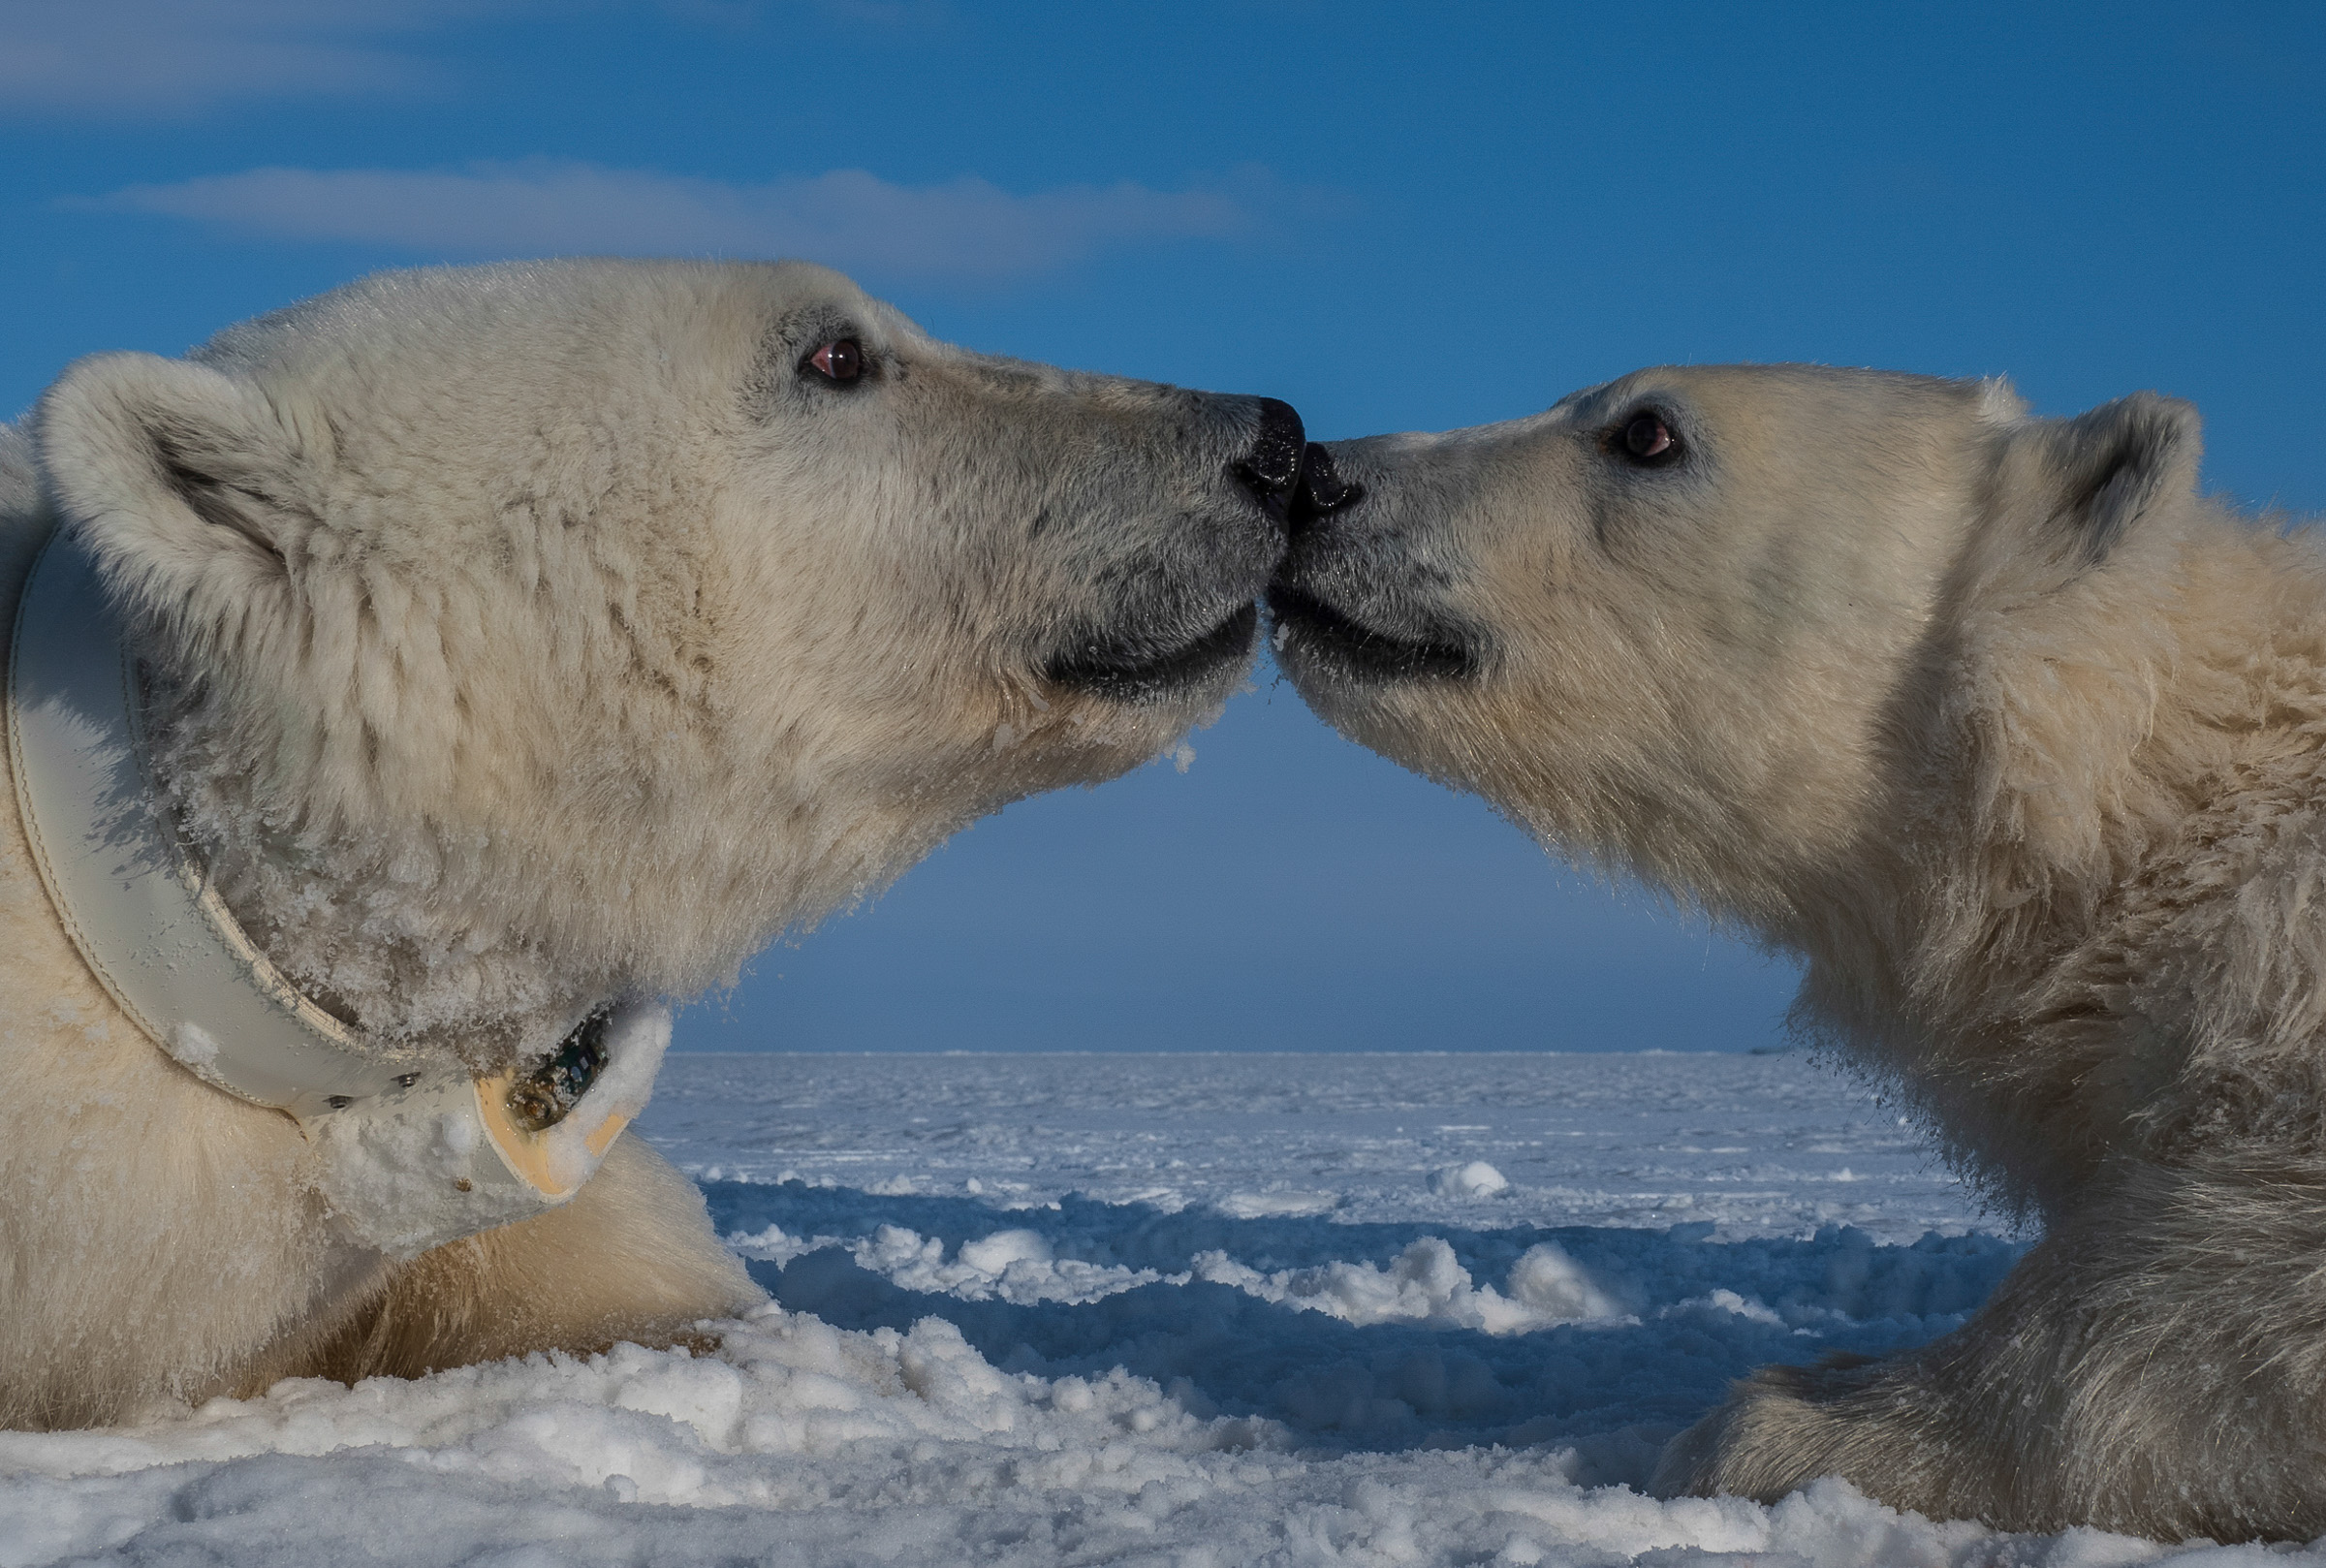 Female with a newly deployed satellite collar, with her yearling daughter. The collar records activity, percentage of time in water, and temperature. JONAA©Jon Aars / Norwegian Polar Institute